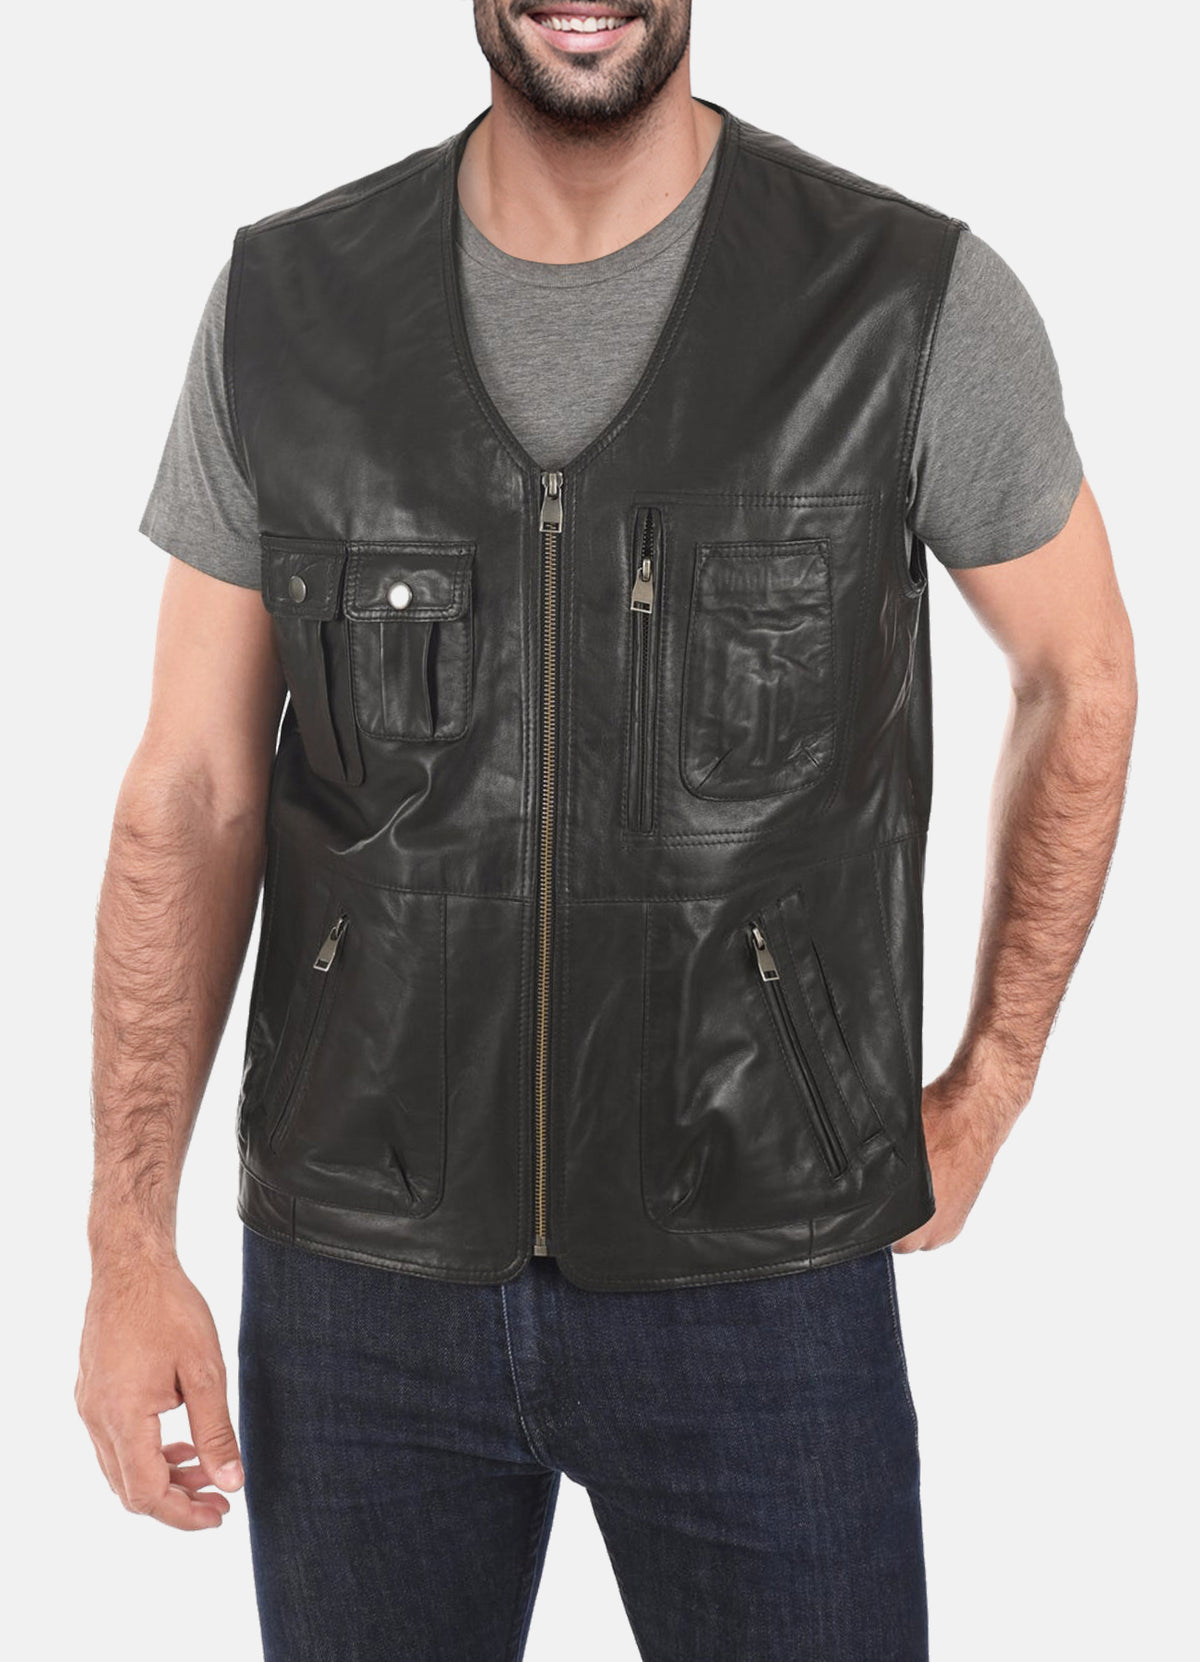 Mens Military Style Black Leather Vest